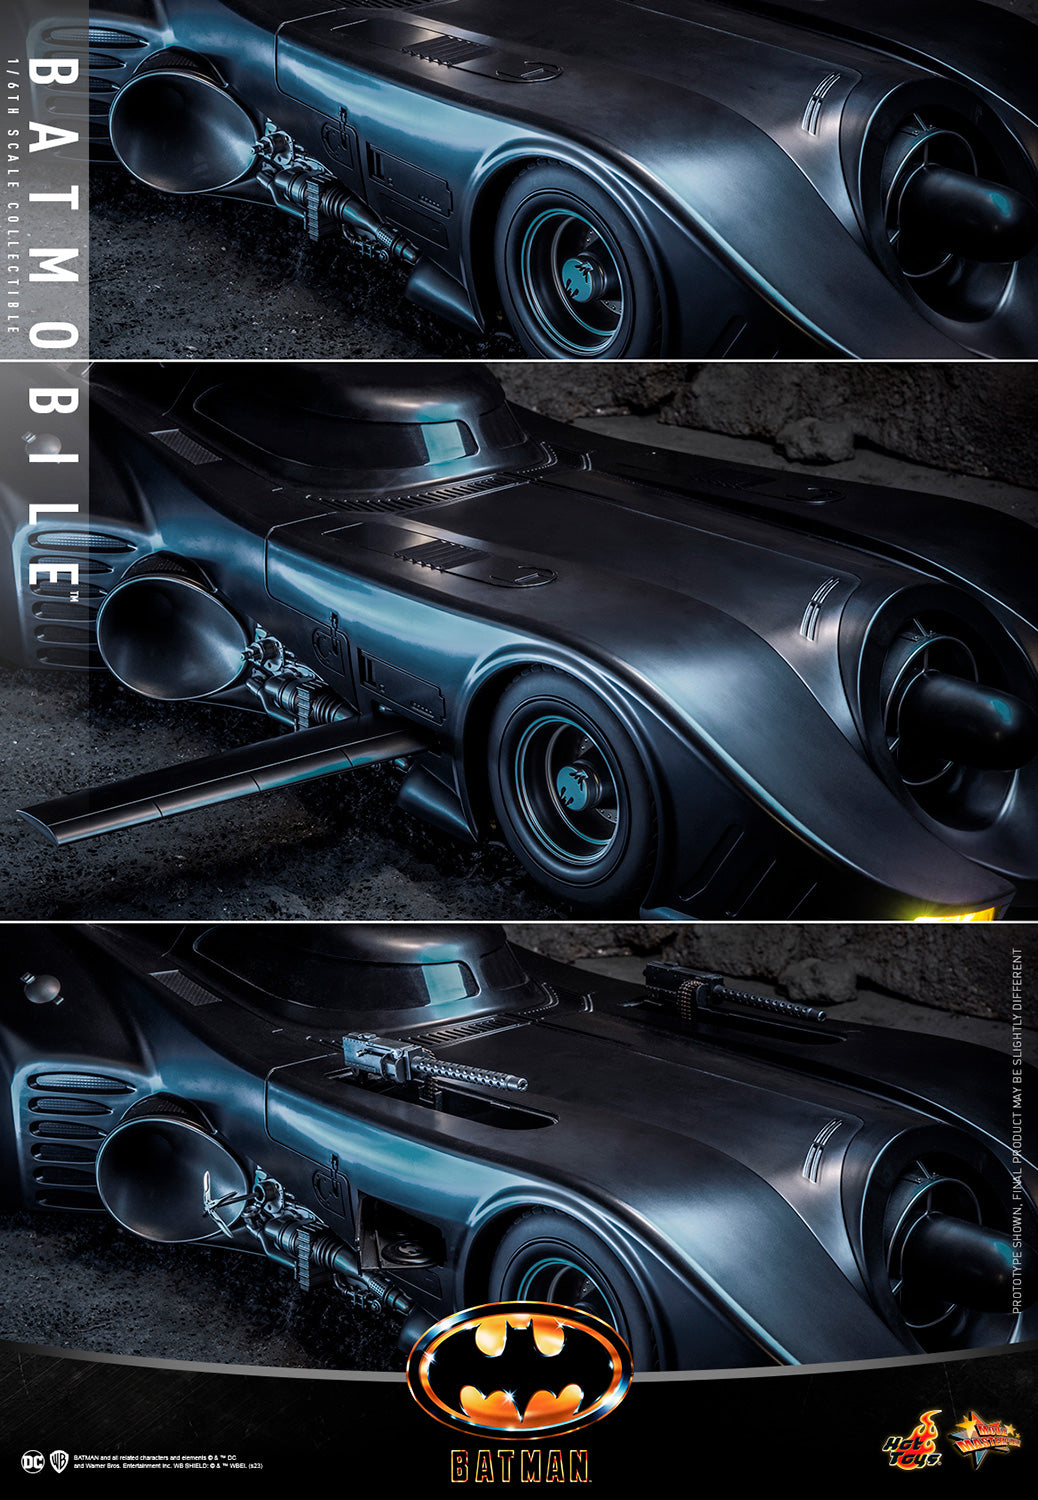 1989 Batmobile Sixth Scale Figure Accessory by Hot Toys